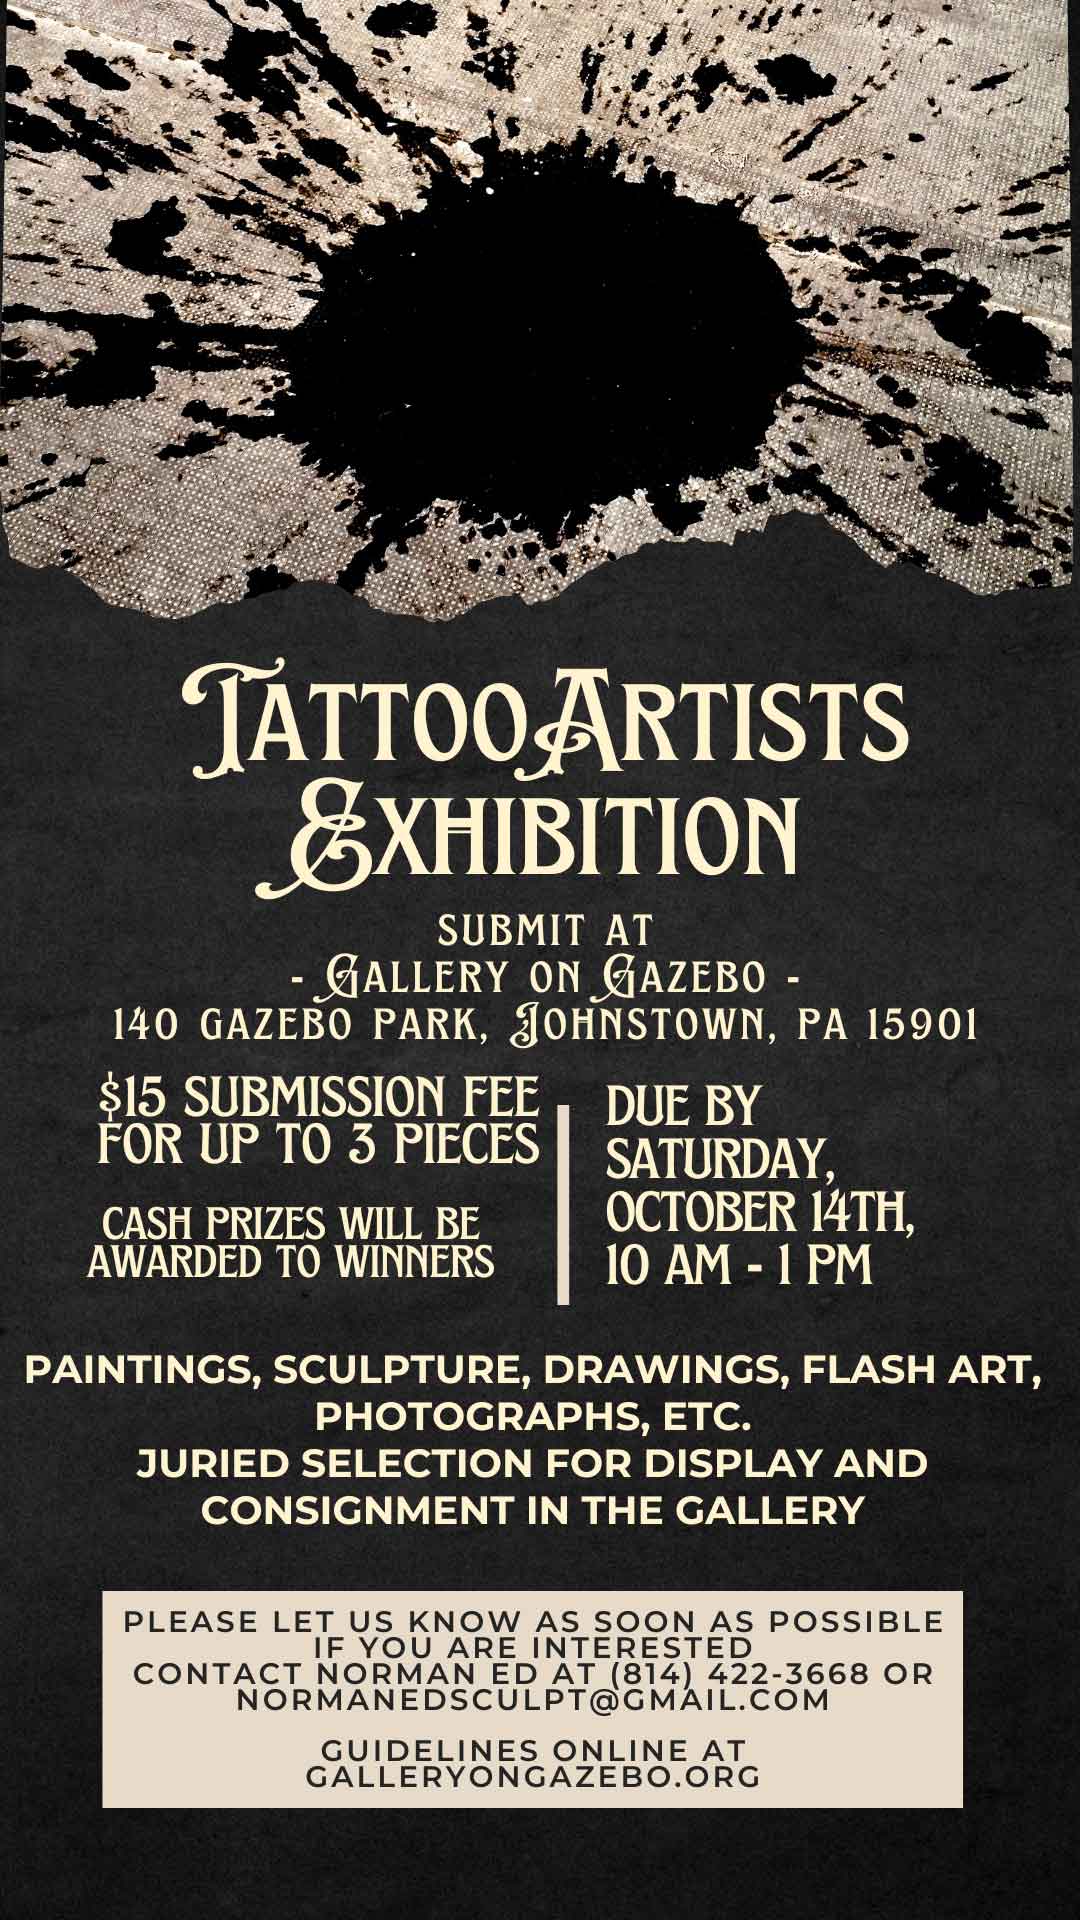 Call for Entries: Tattoo Exhibit